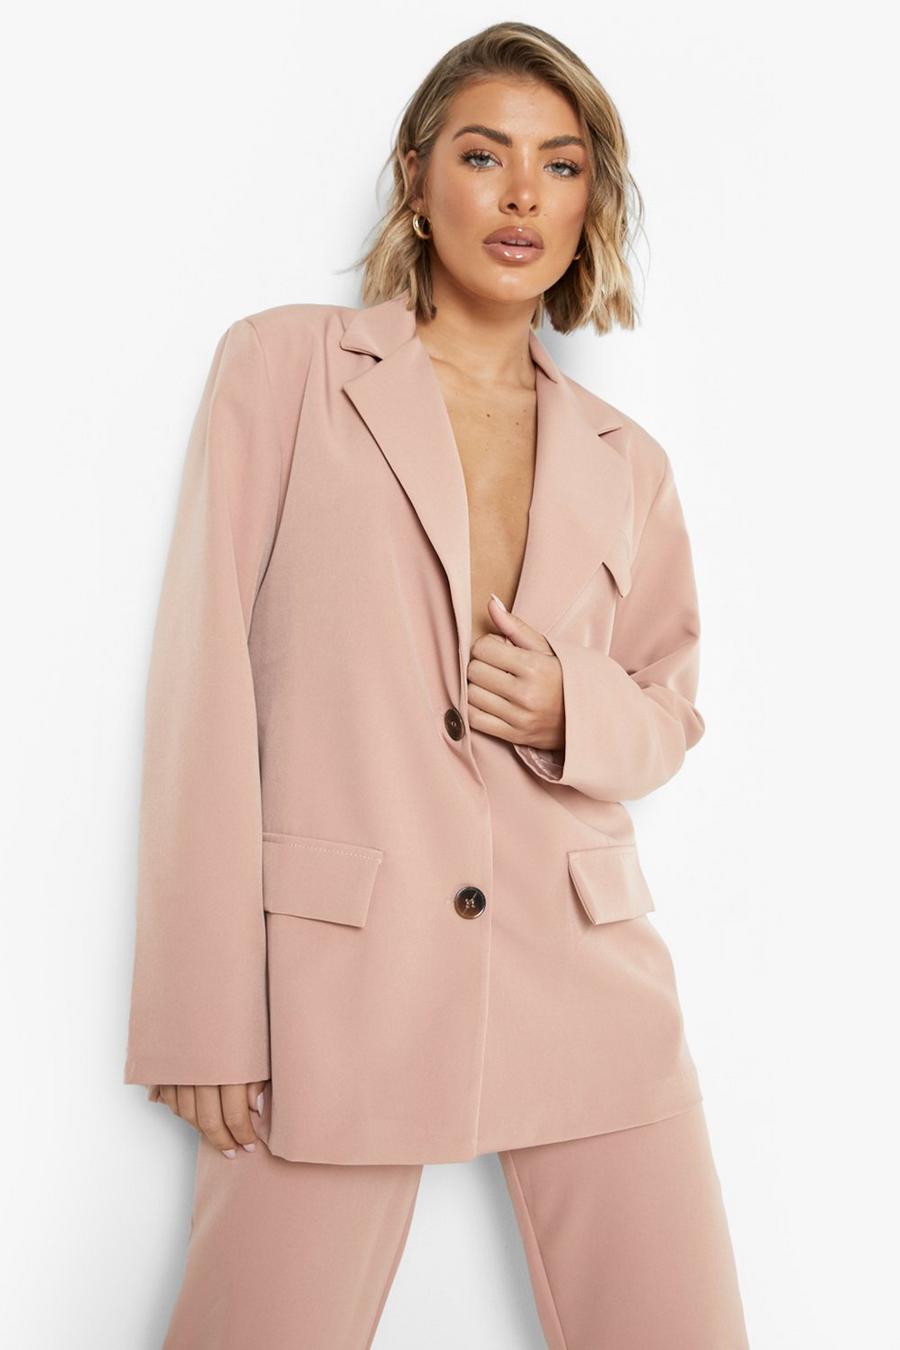 Nude Pocket Detail Relaxed Fit Blazer